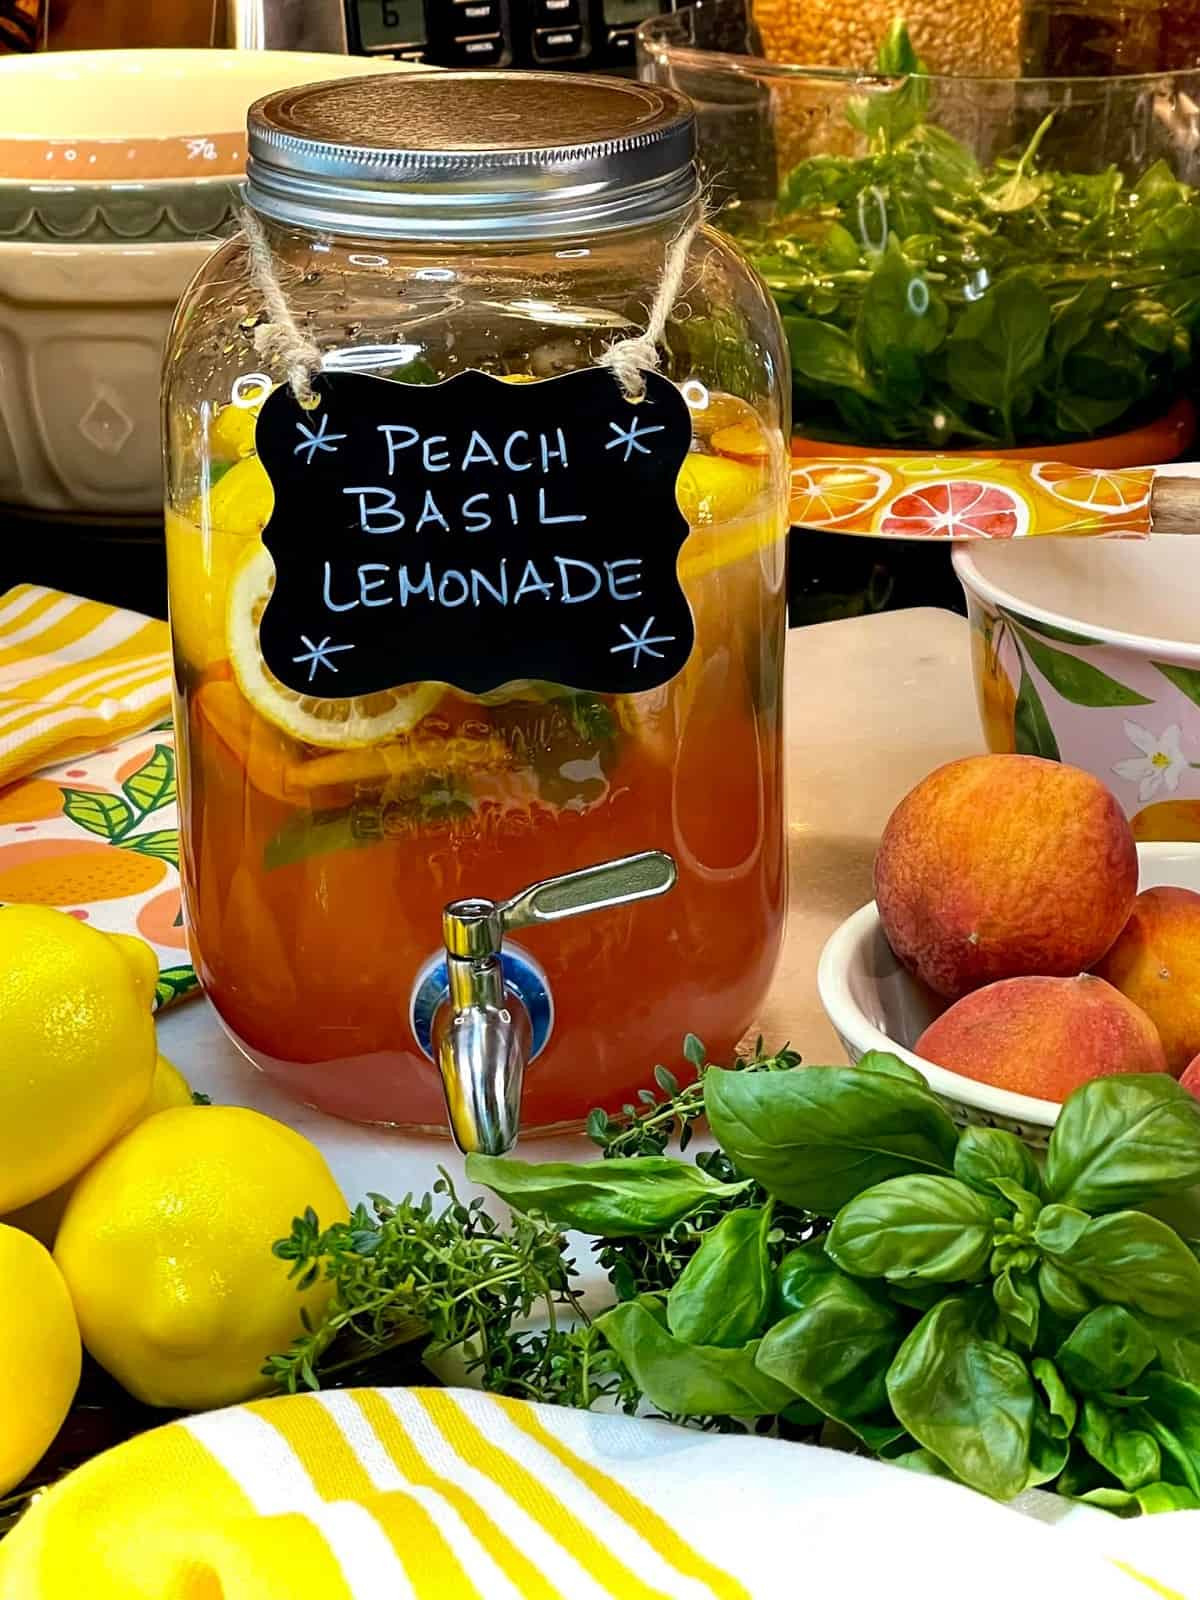 A super colorful jug of Peach Basil Lemonade on the kitchen counter with fresh fruit and herbs all around.